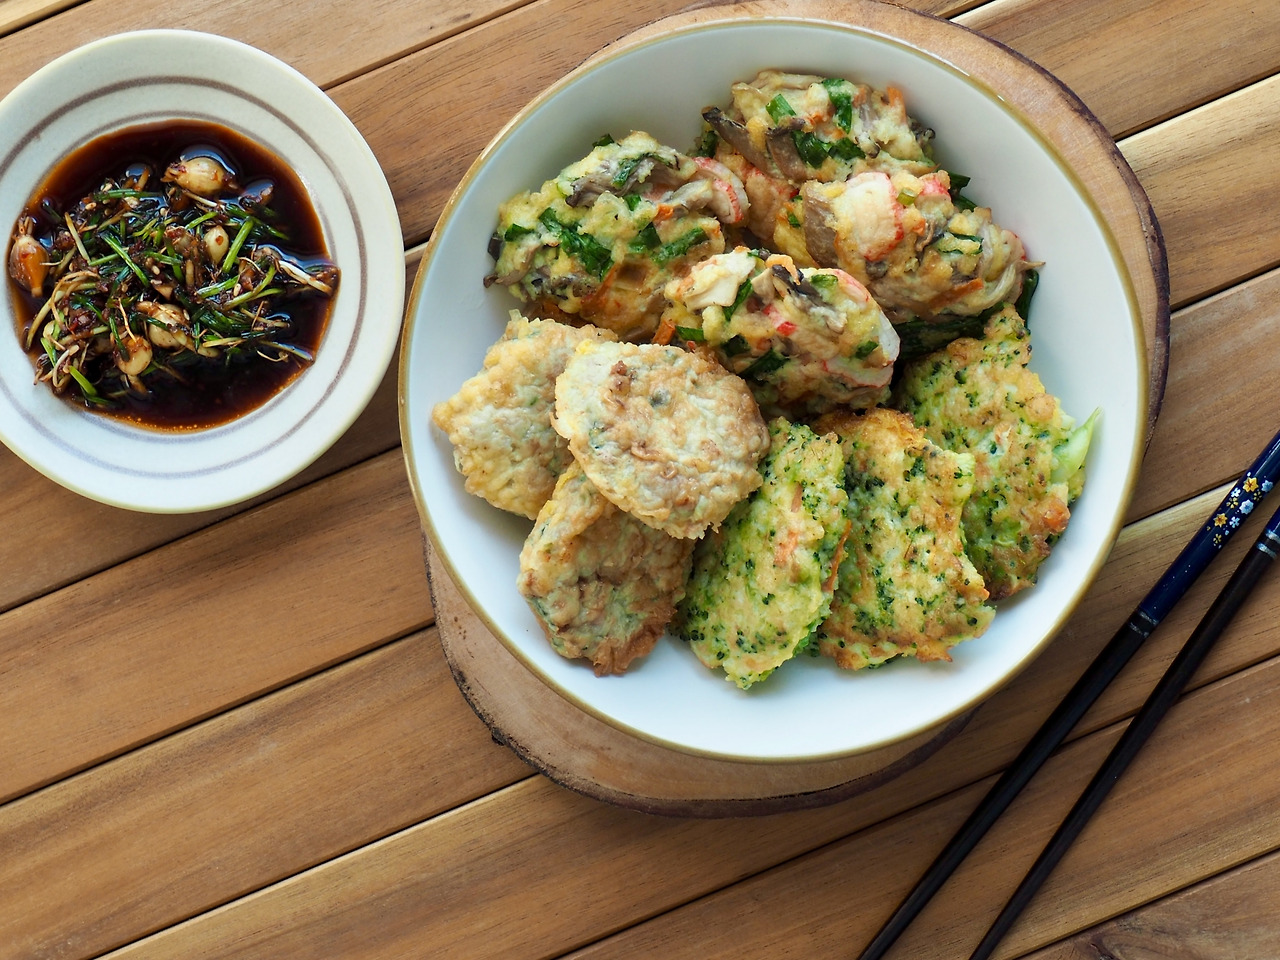 Assorted jeon, pan-fried battered food